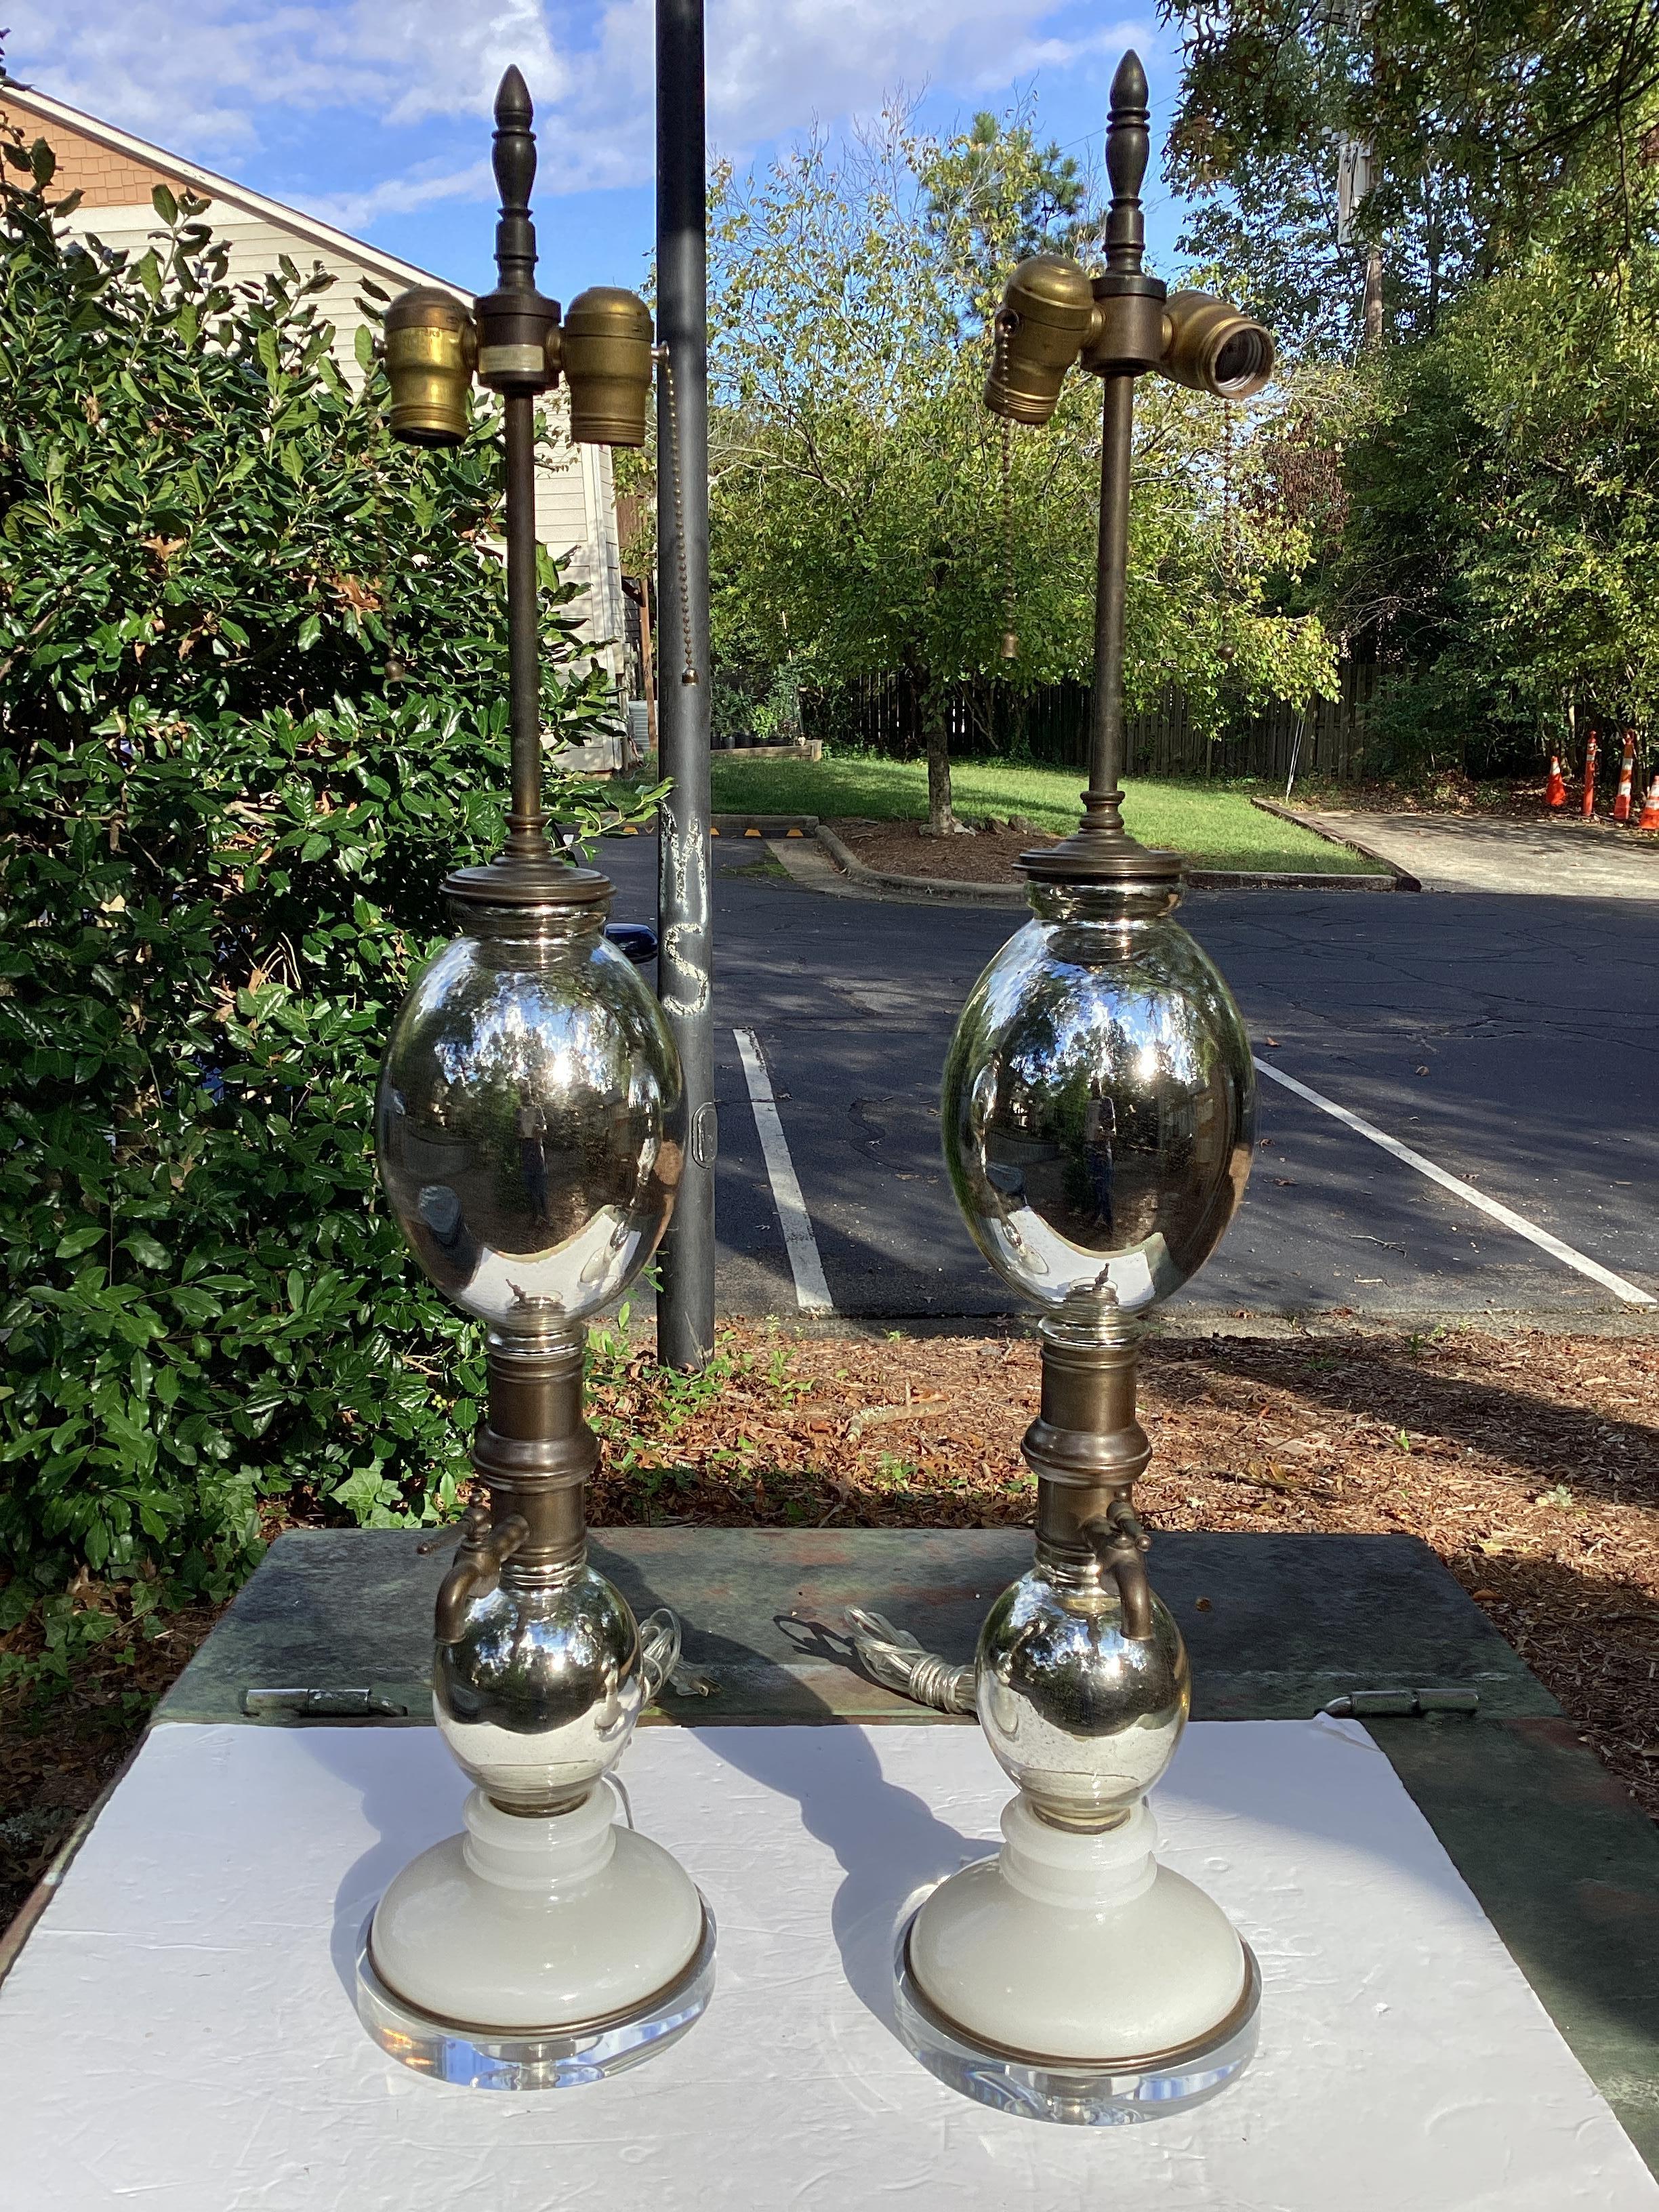 Pair of Mercury Glass Seltzer Bottle Lamps by Warren Kessler. Mercury glass with brass fittings and opaline glass mounted on a lucite base. Lamps are wired and in working condition with double sockets.